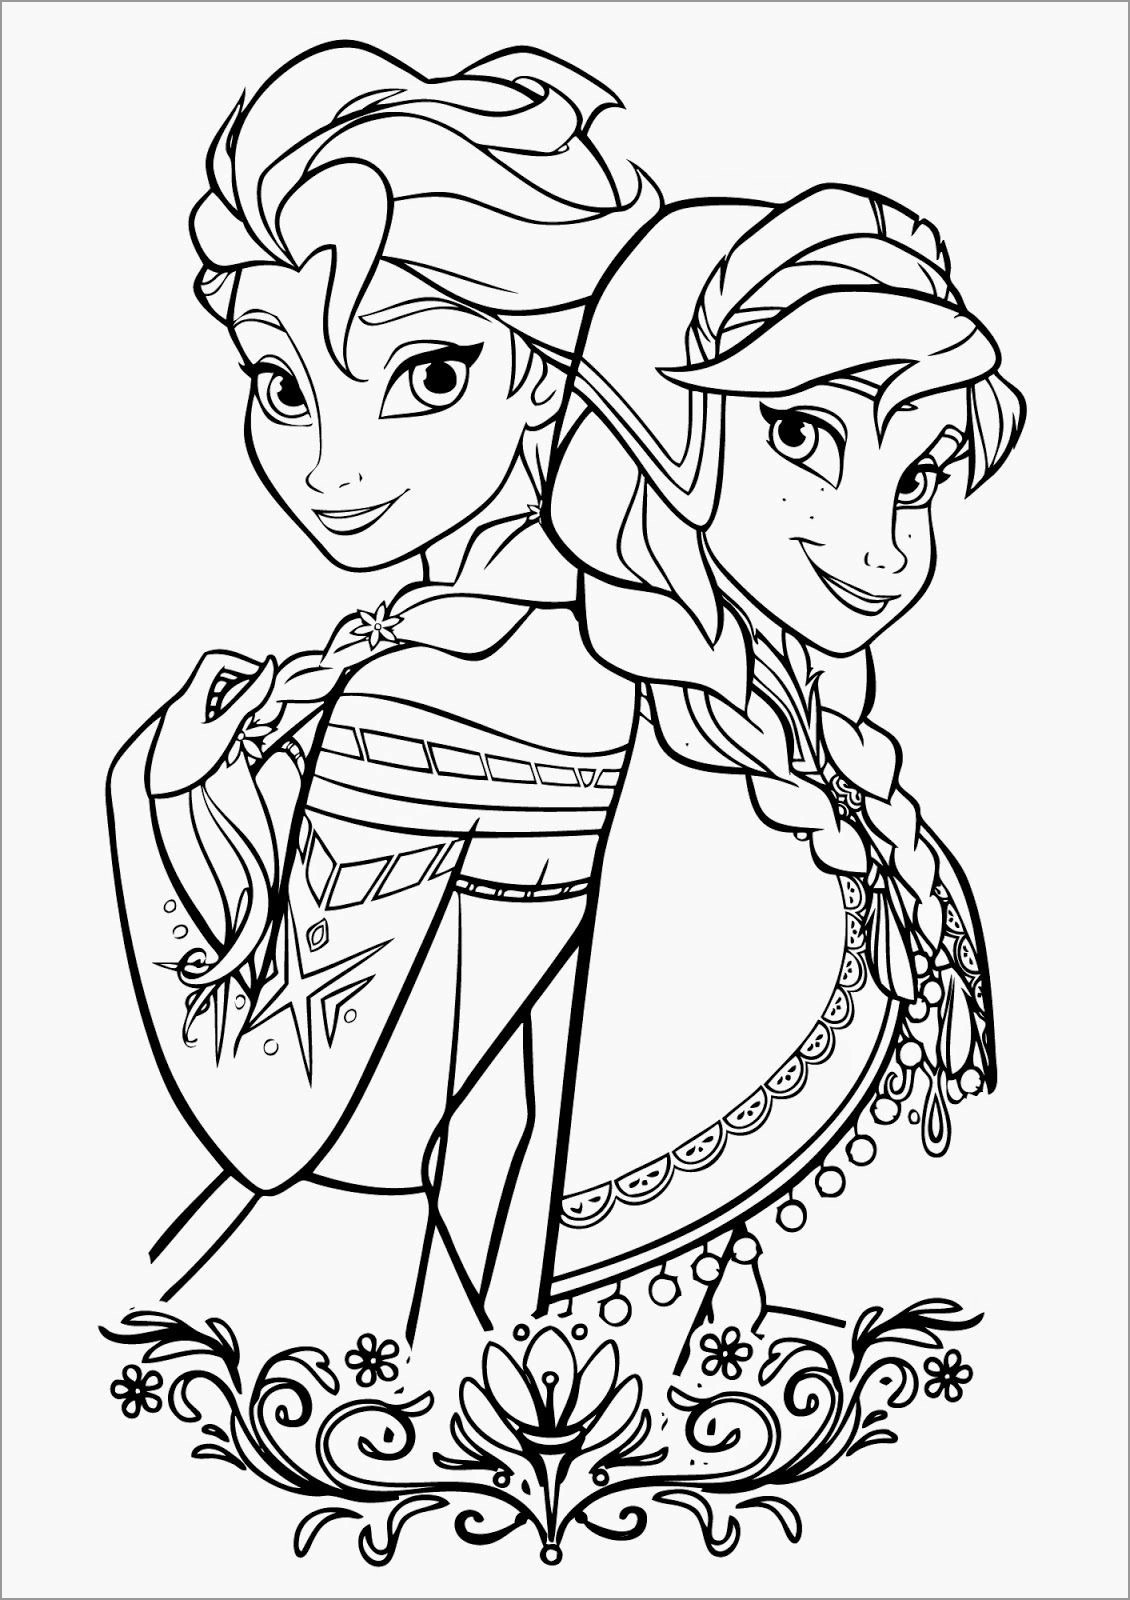 Elsa and Anna Frozen Coloring Page for Adult